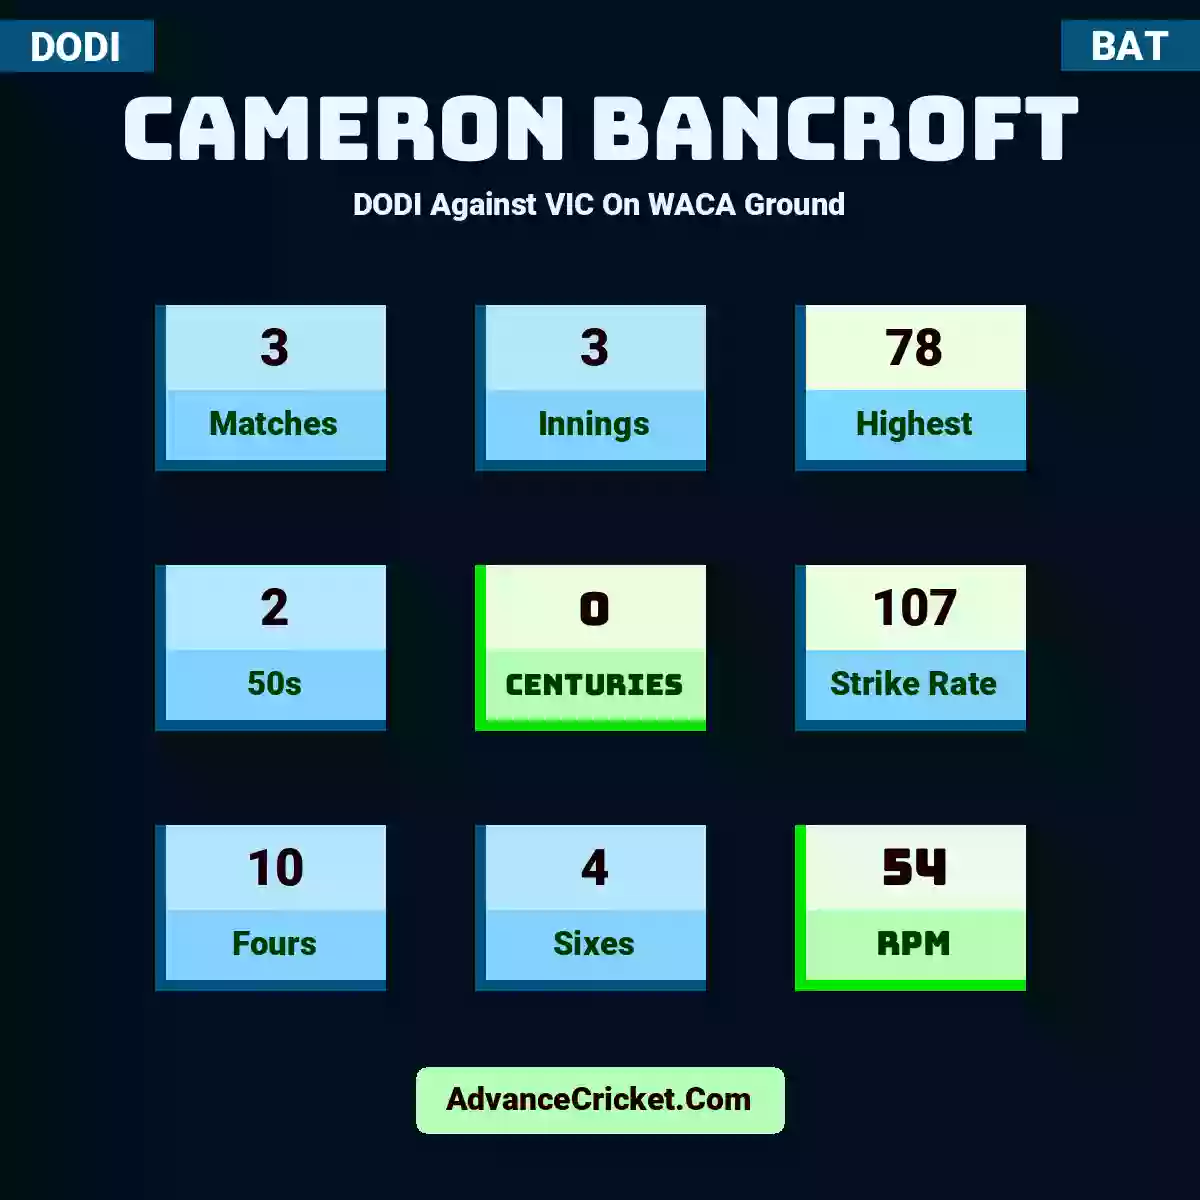 Cameron Bancroft DODI  Against VIC On WACA Ground, Cameron Bancroft played 3 matches, scored 78 runs as highest, 2 half-centuries, and 0 centuries, with a strike rate of 107. C.Bancroft hit 10 fours and 4 sixes, with an RPM of 54.